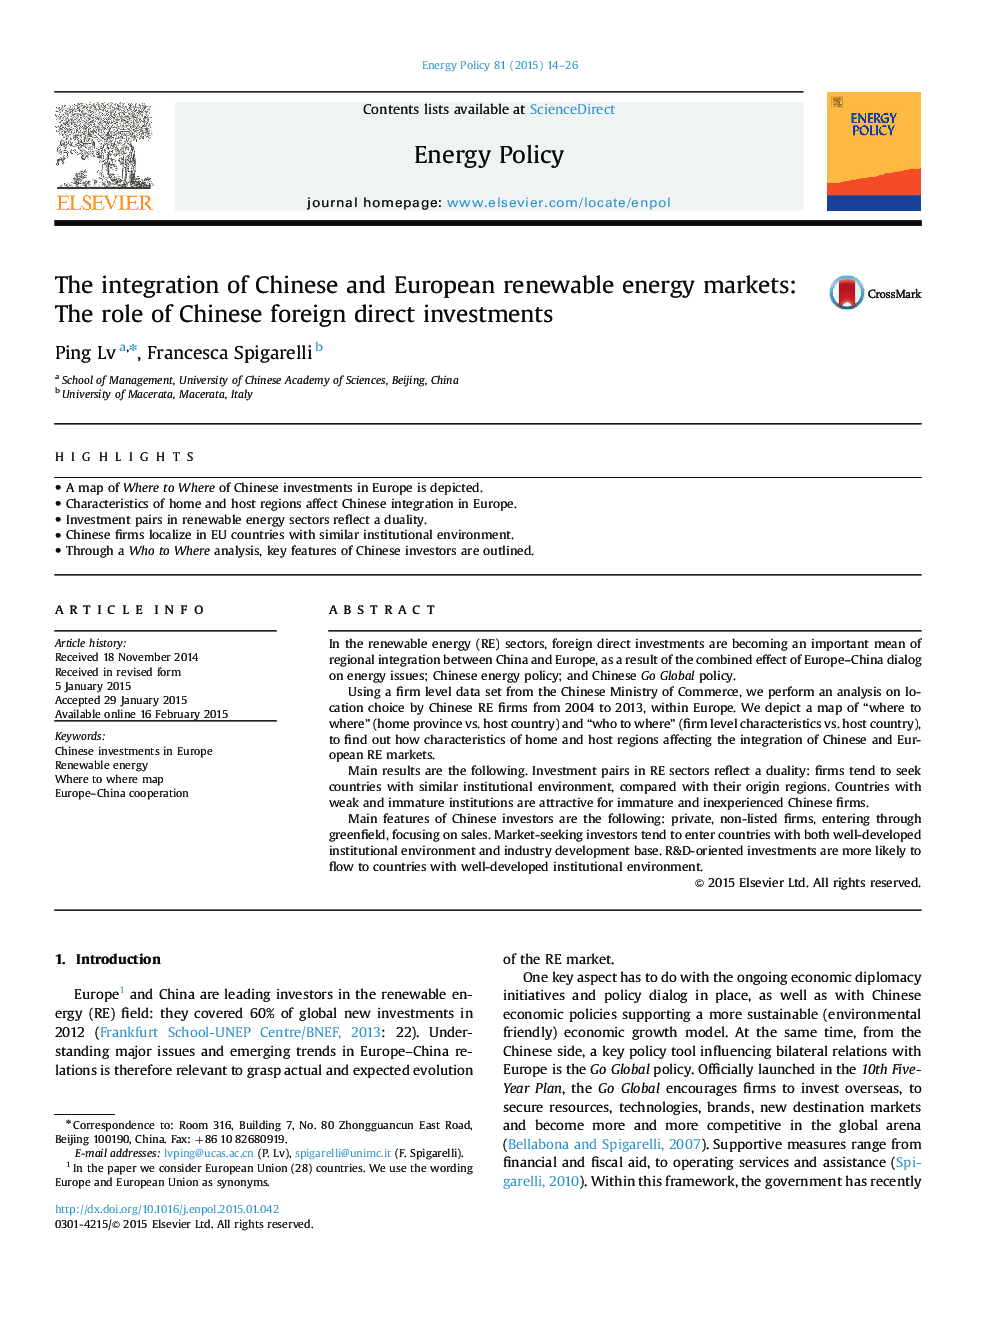 The integration of Chinese and European renewable energy markets: The role of Chinese foreign direct investments